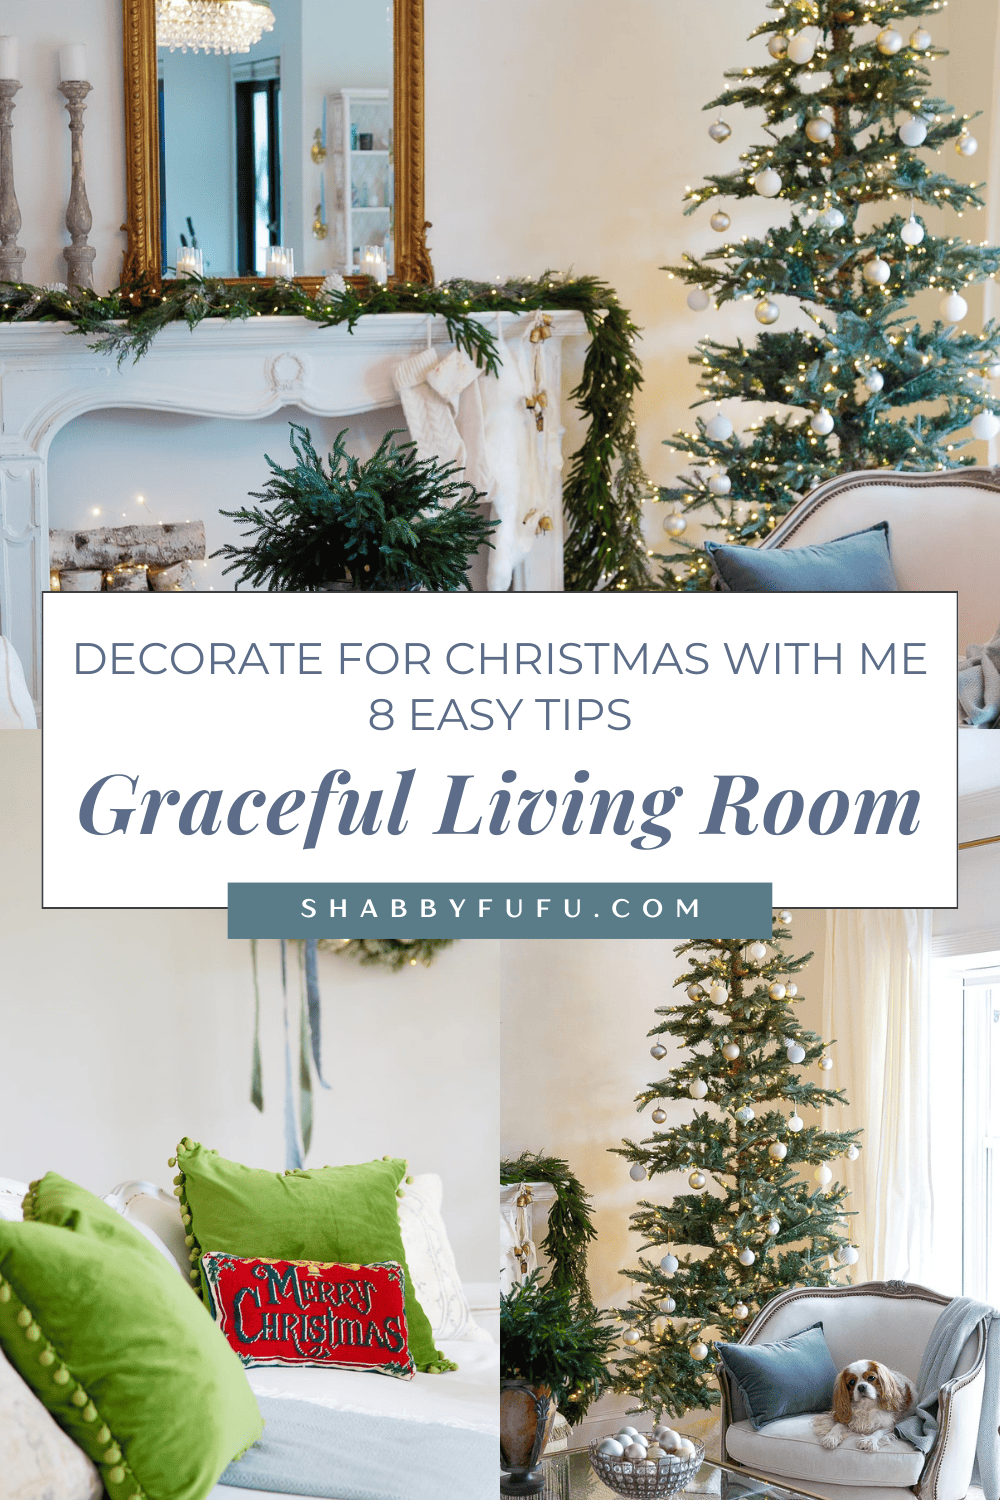 Pinterest graphic featuring collage of images with Christmas decor and titled "Decorate for Christmas With Me - 8 Tips: Graceful Living Room Edition!"